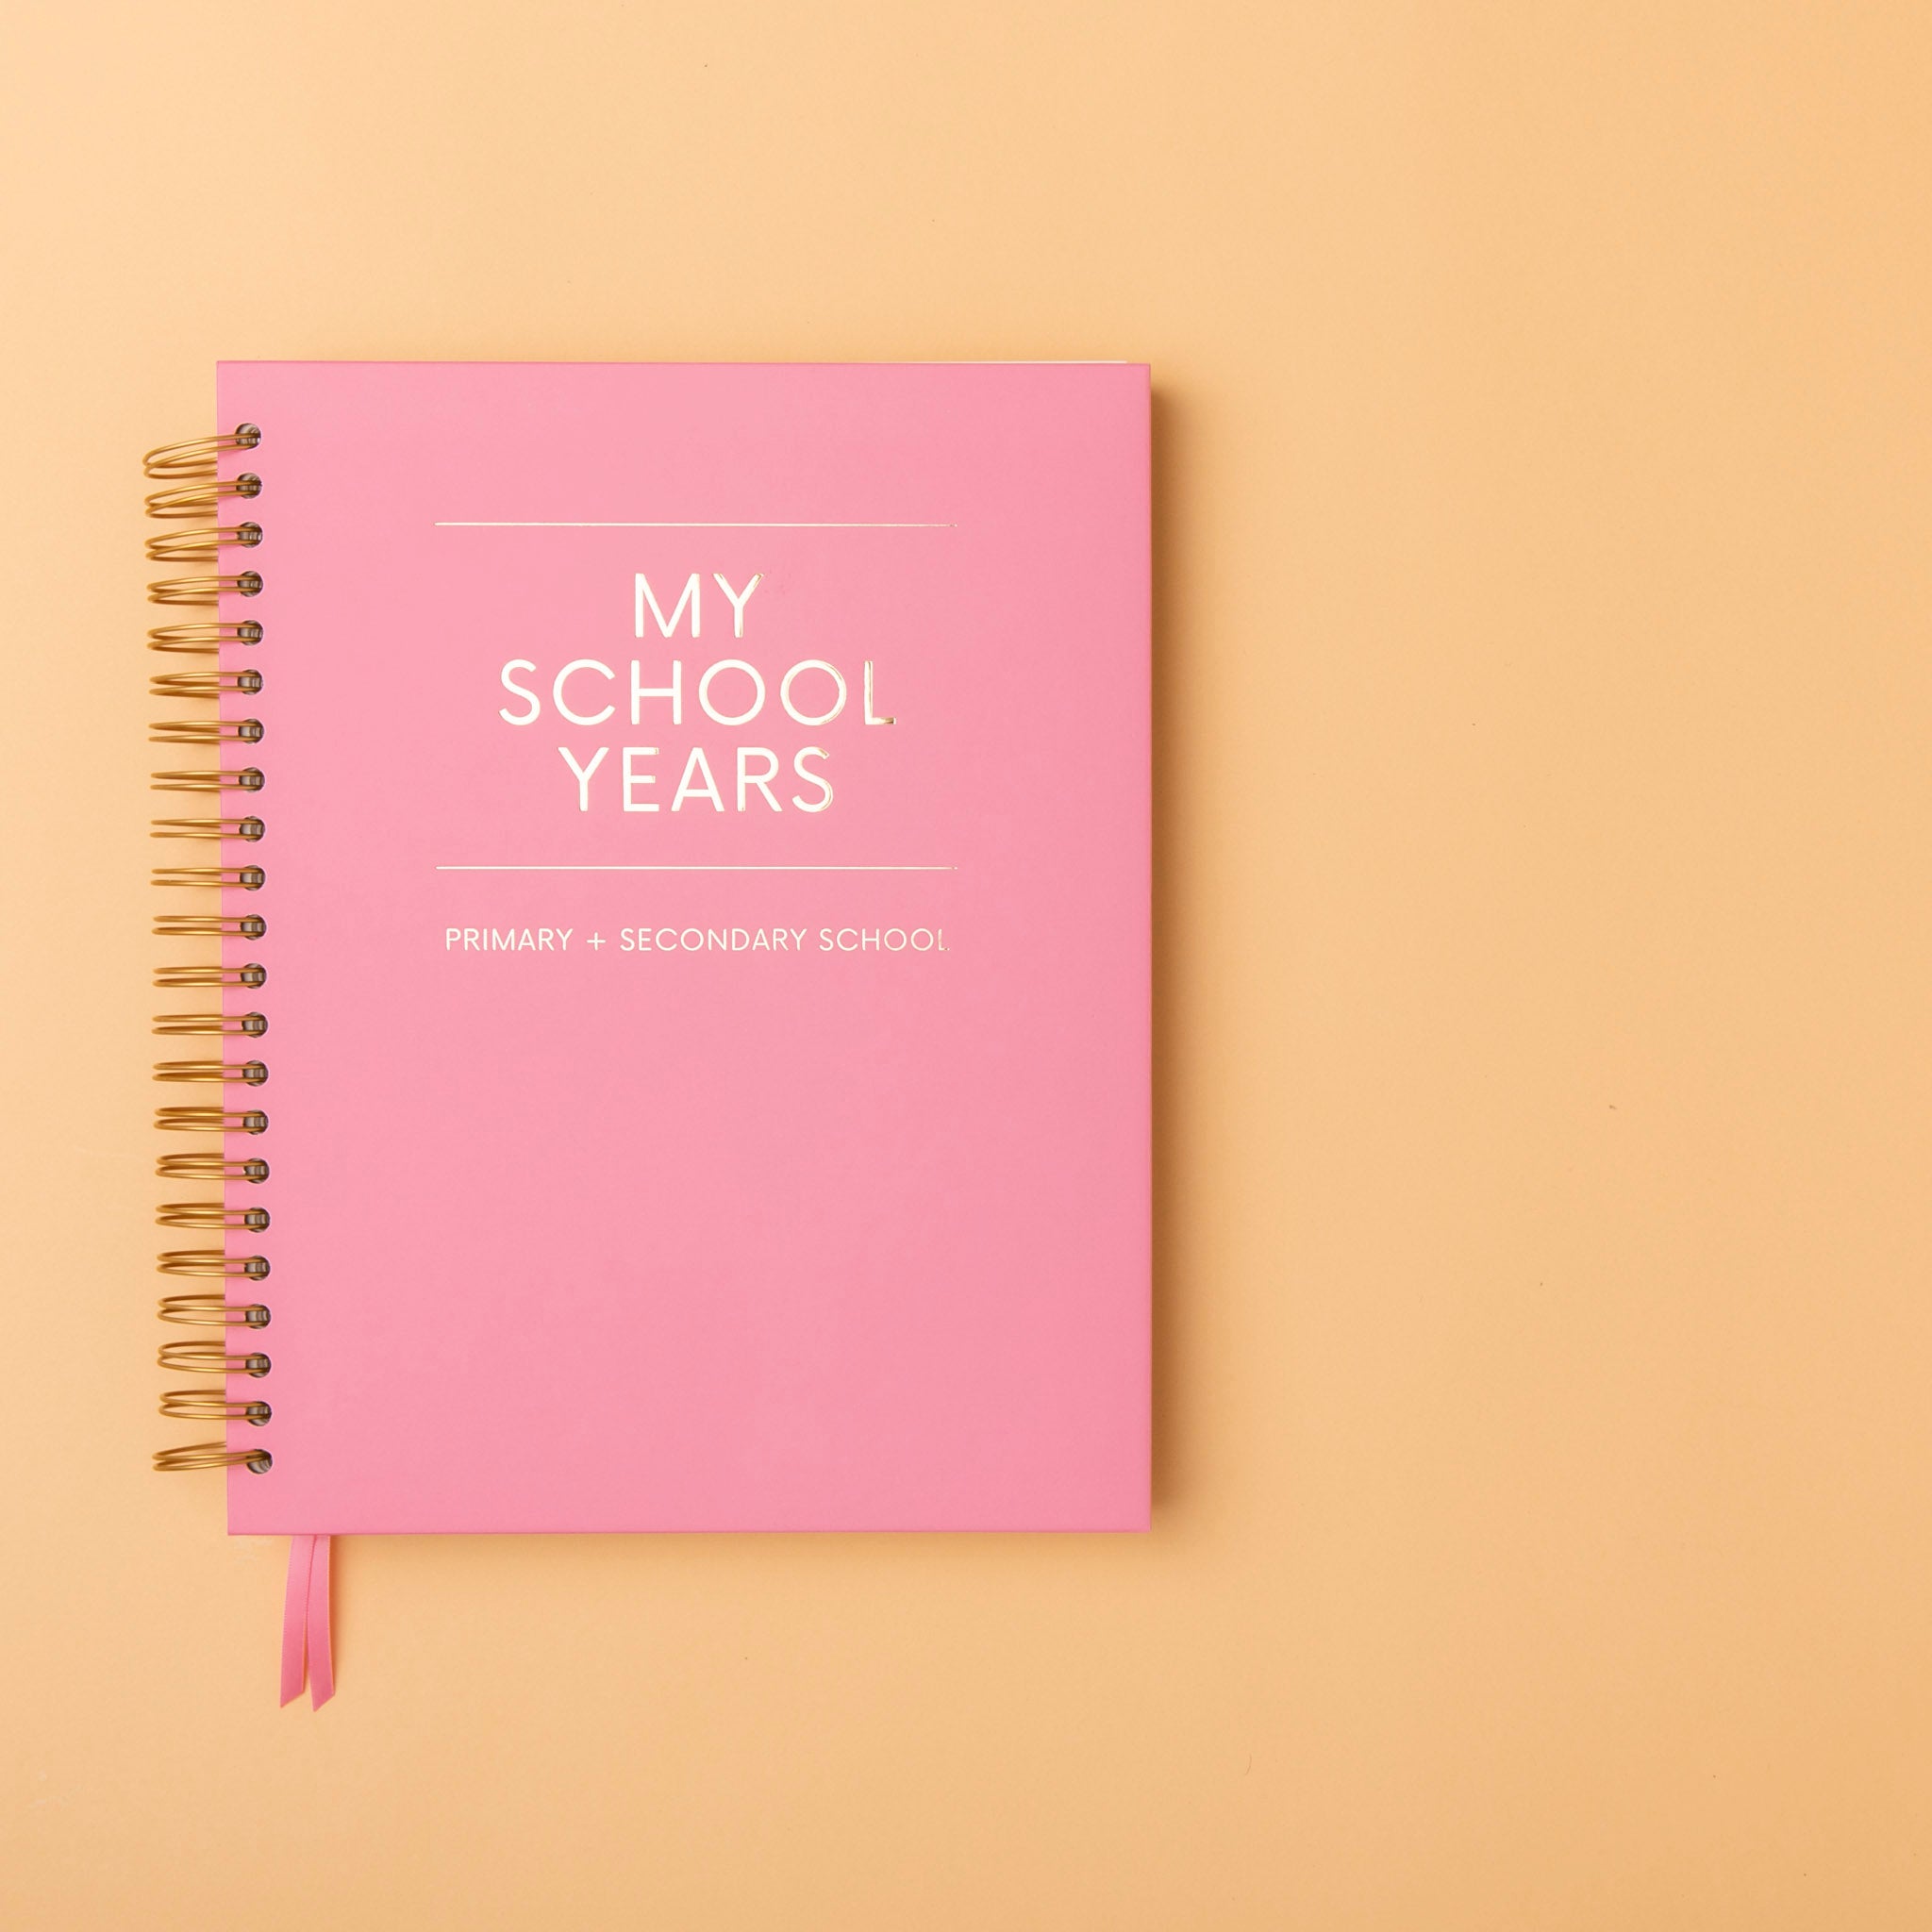 Buy 2 Luxe Journals Get 1 Free! (Plus a FREE Mum's Journal)